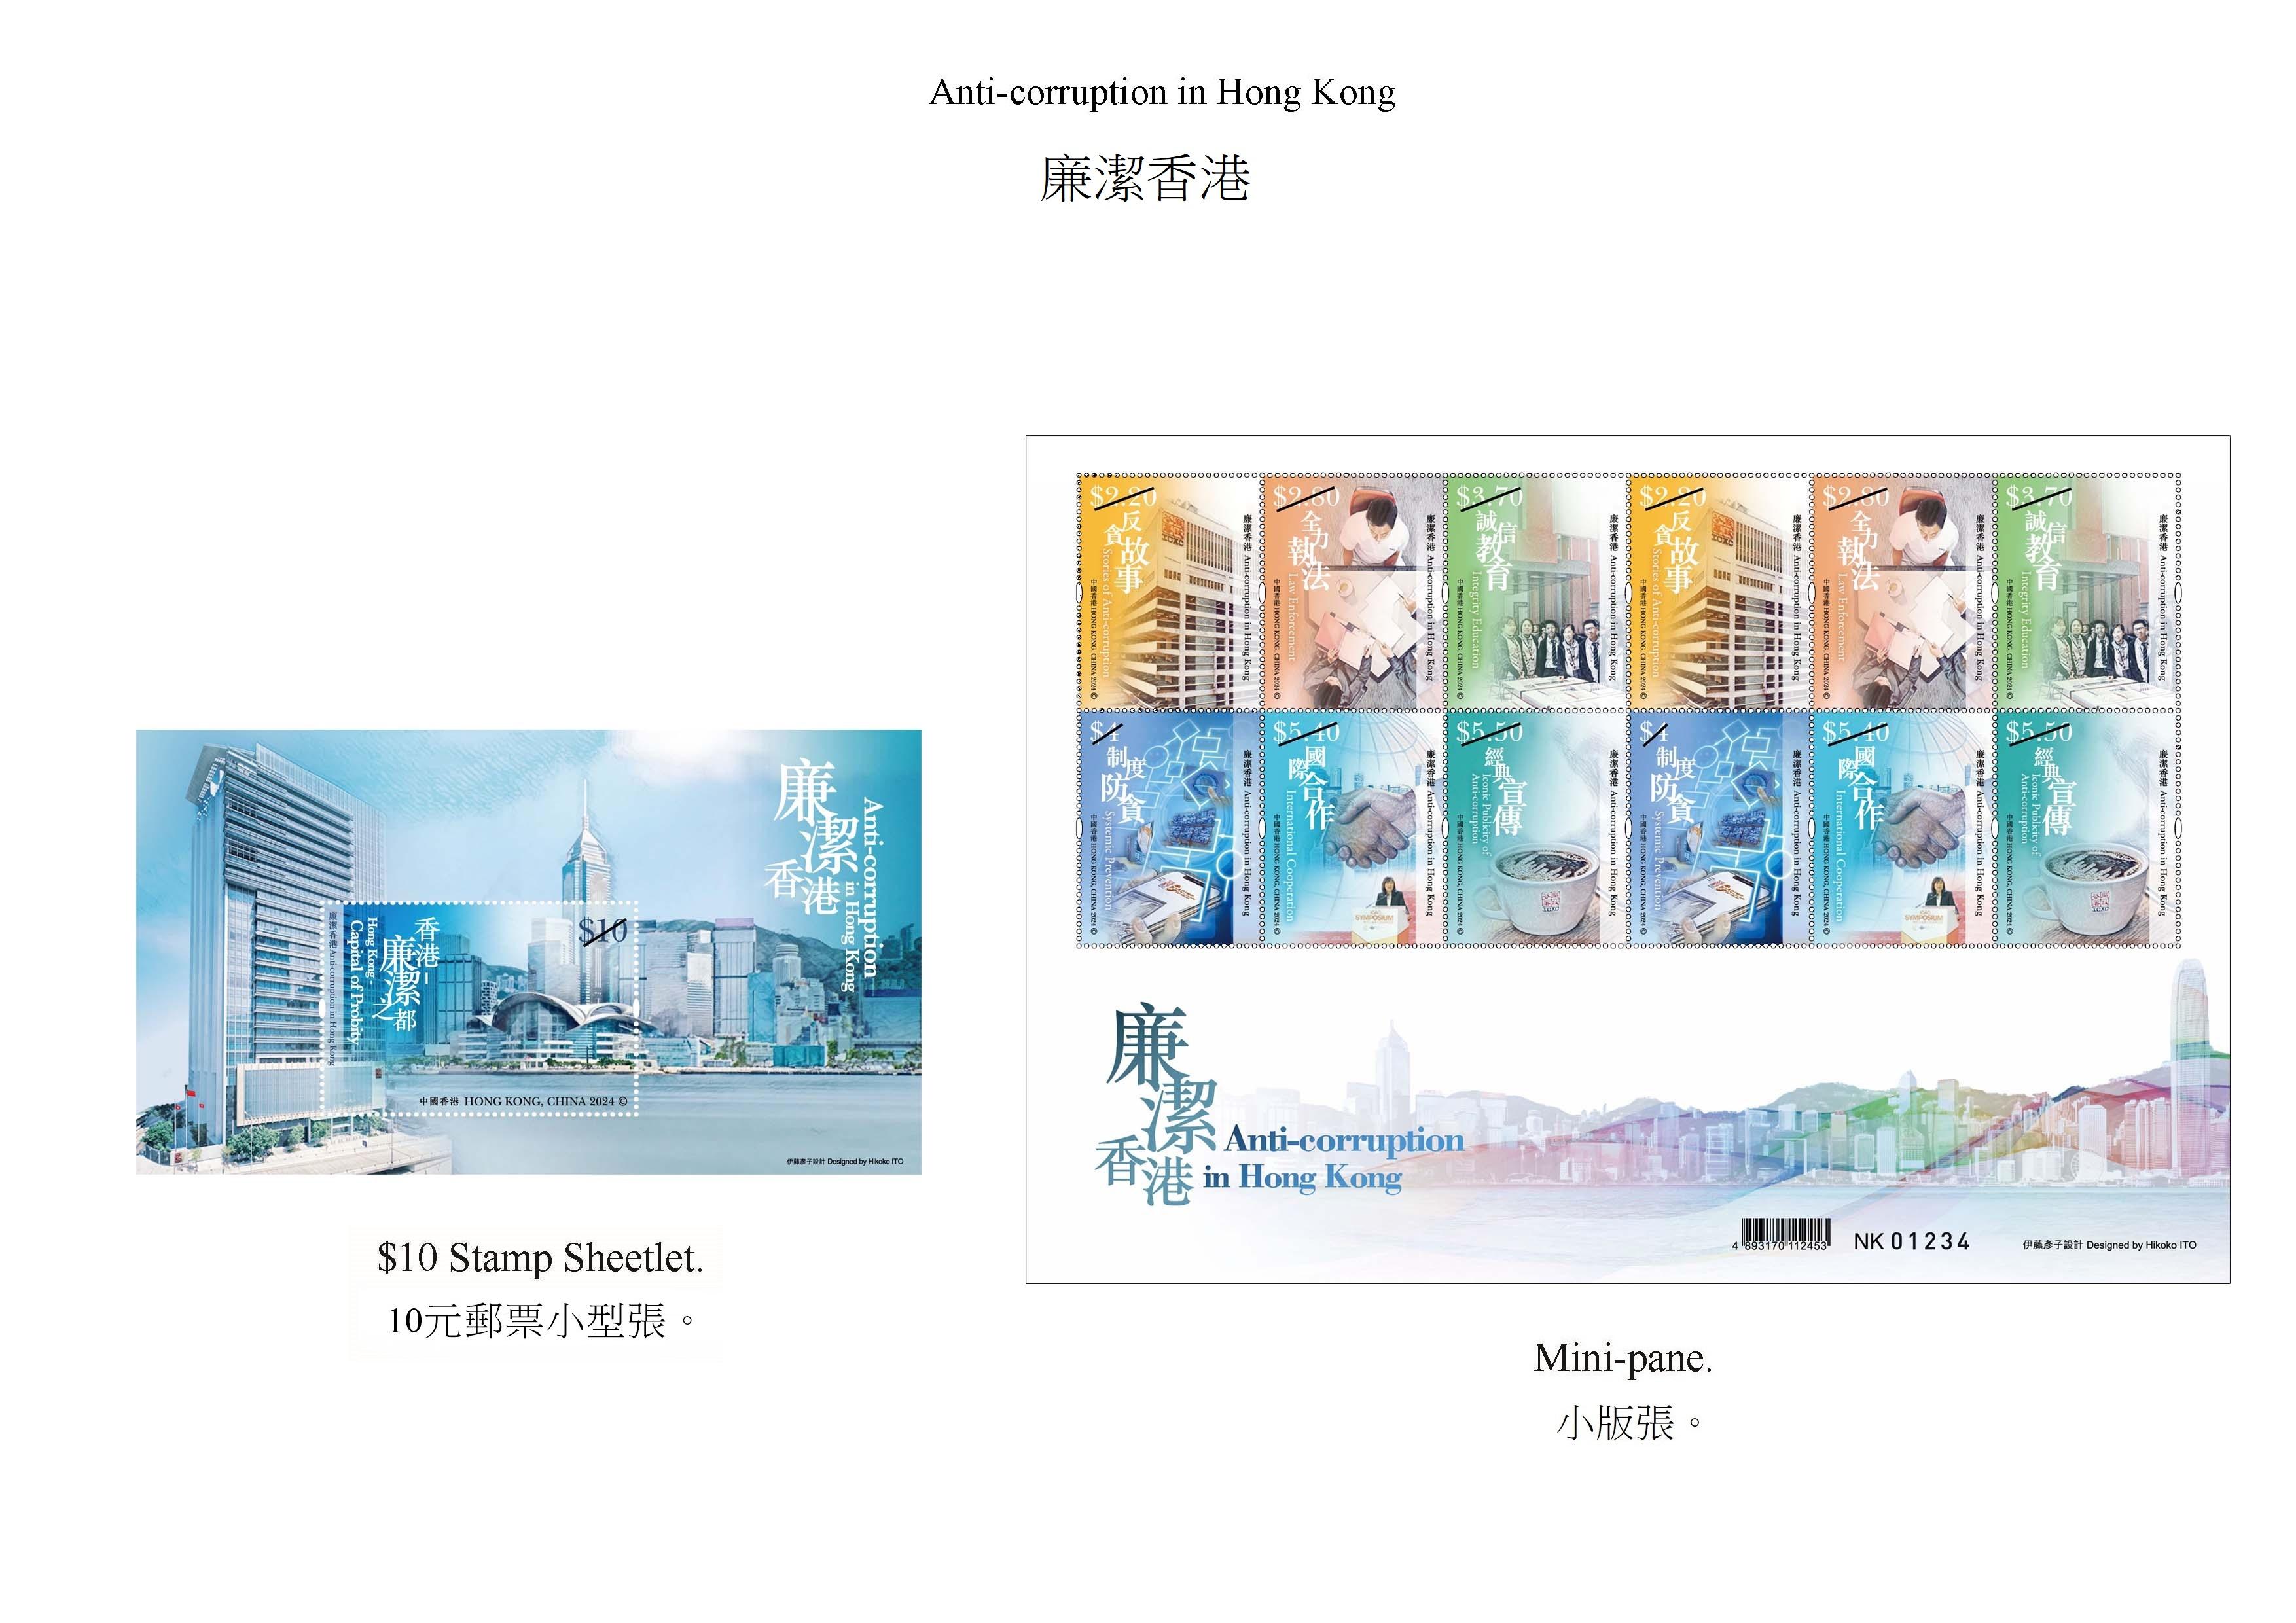 Hongkong Post will launch a special stamp issue and associated philatelic products on the theme of “Anti-corruption in Hong Kong” on February 15 (Thursday).  Photos show the stamp sheetlet and the mini-pane.